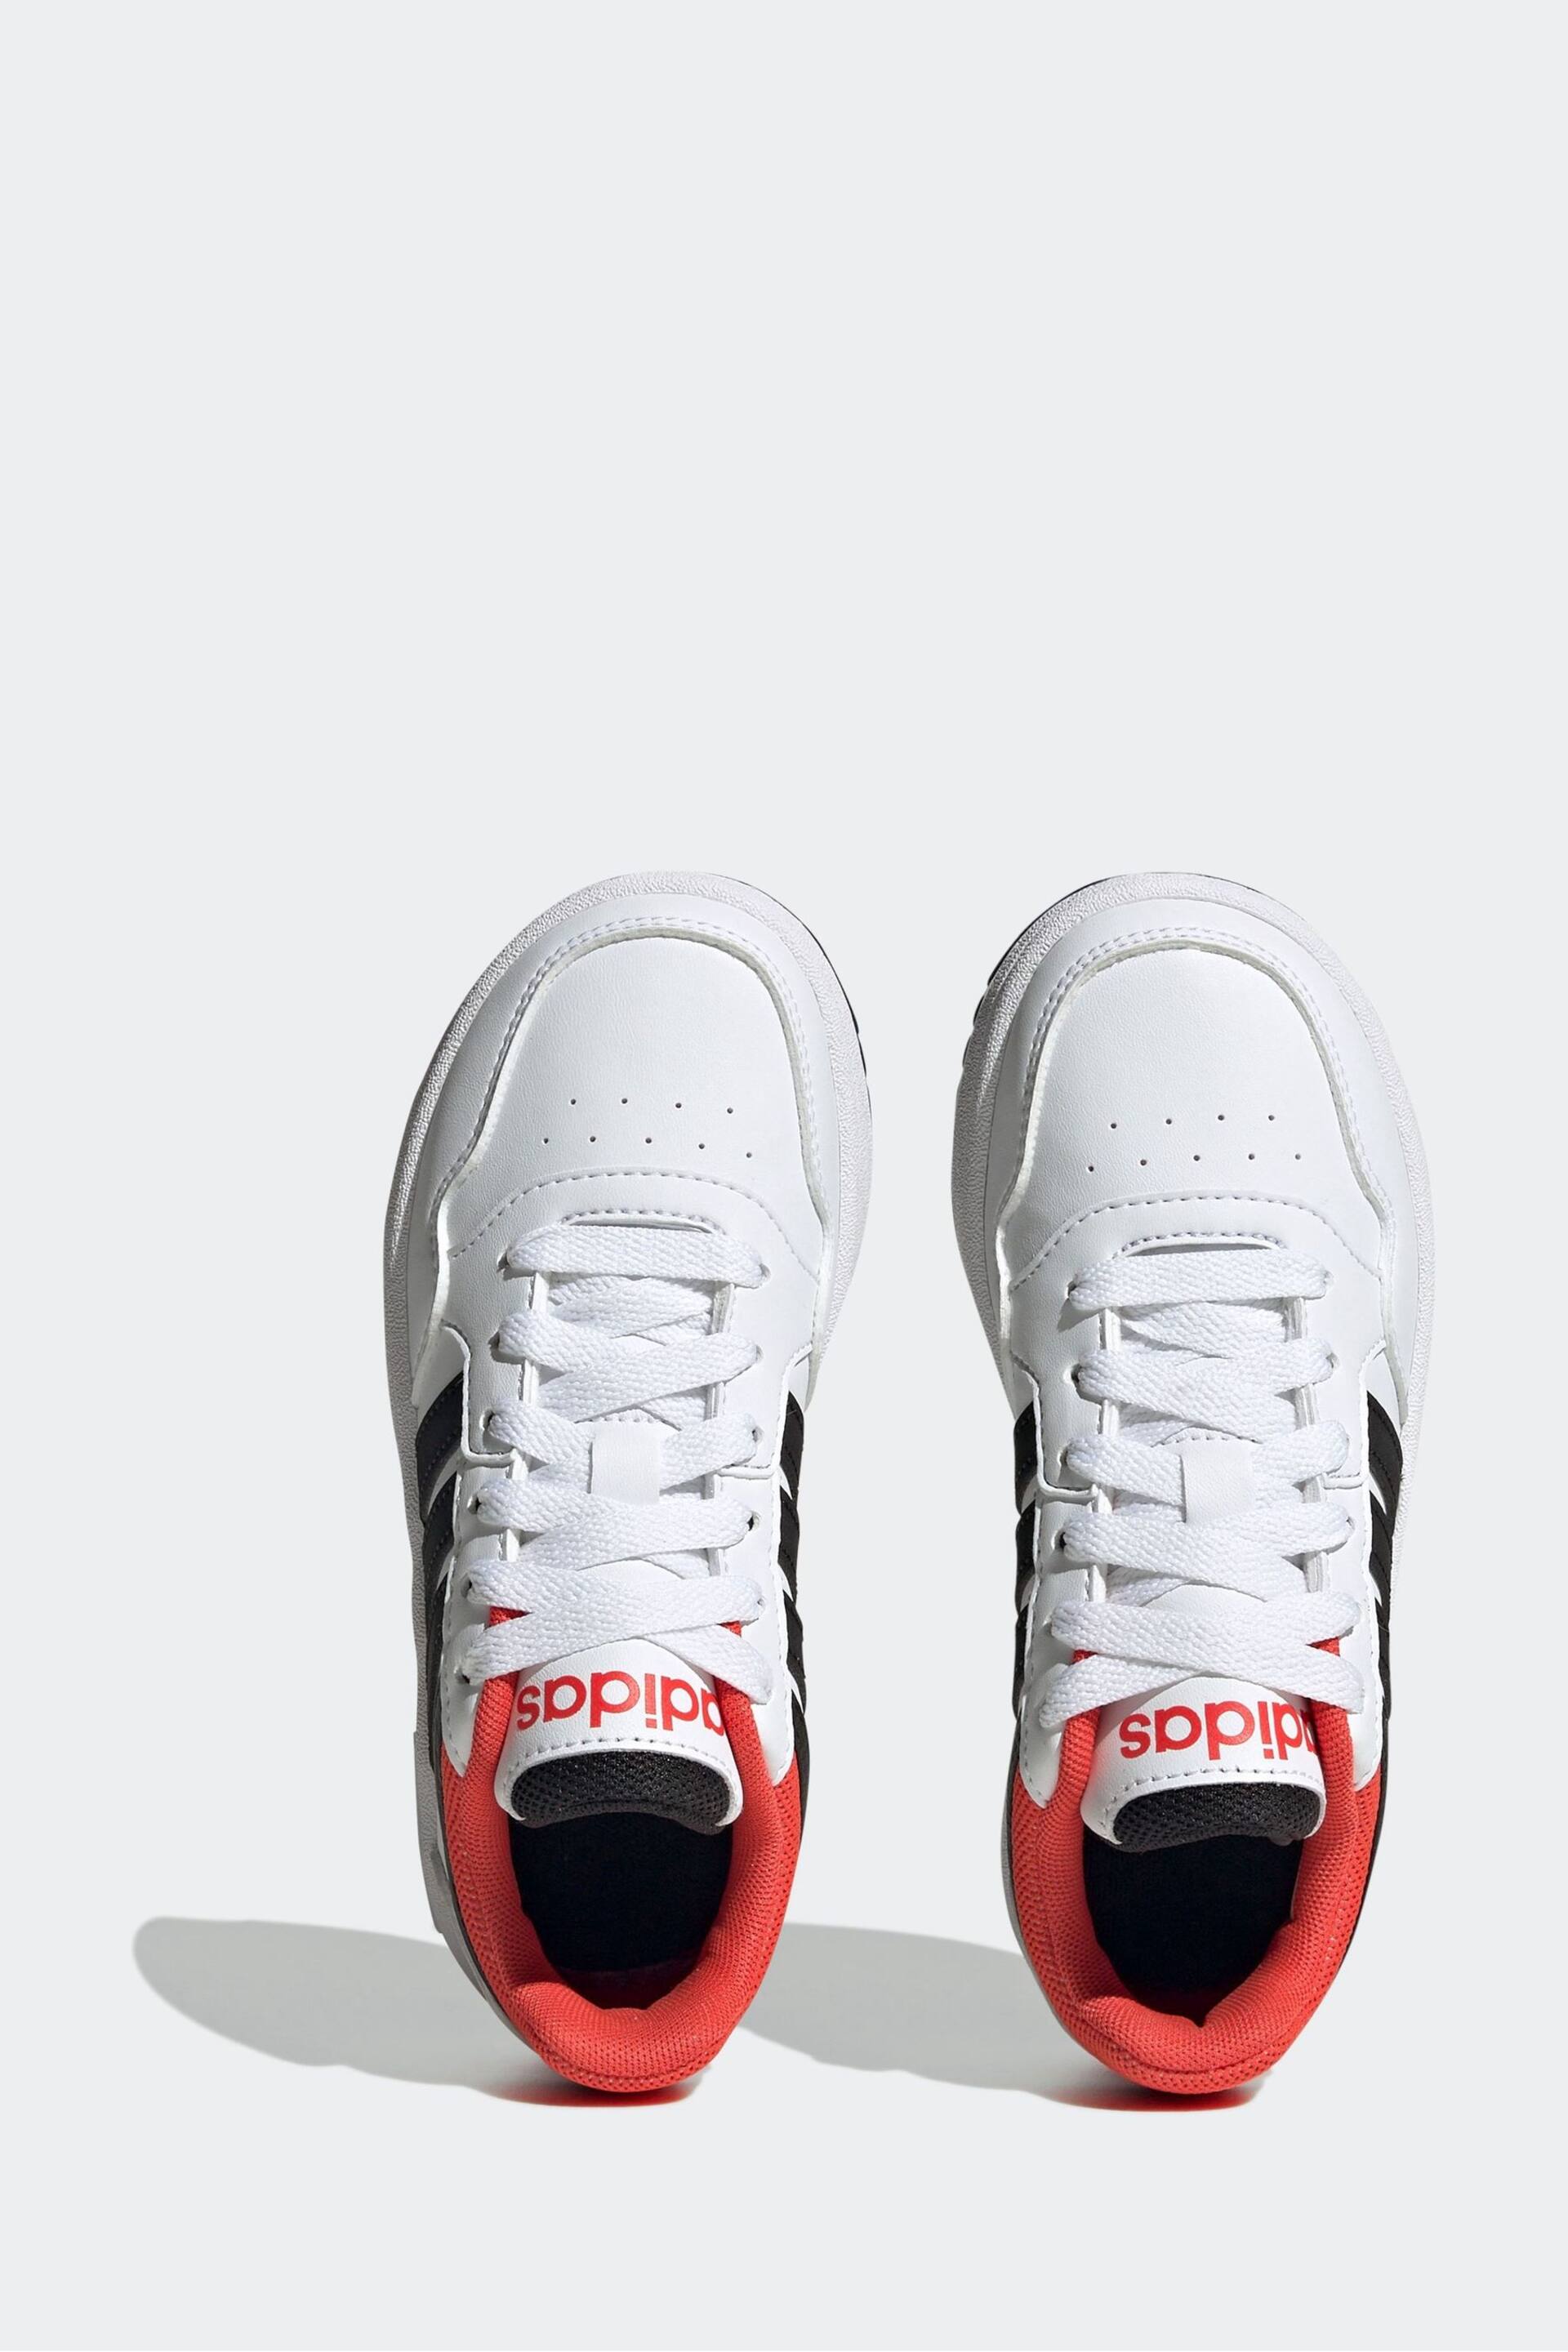 adidas White Hoops Trainers - Image 6 of 9